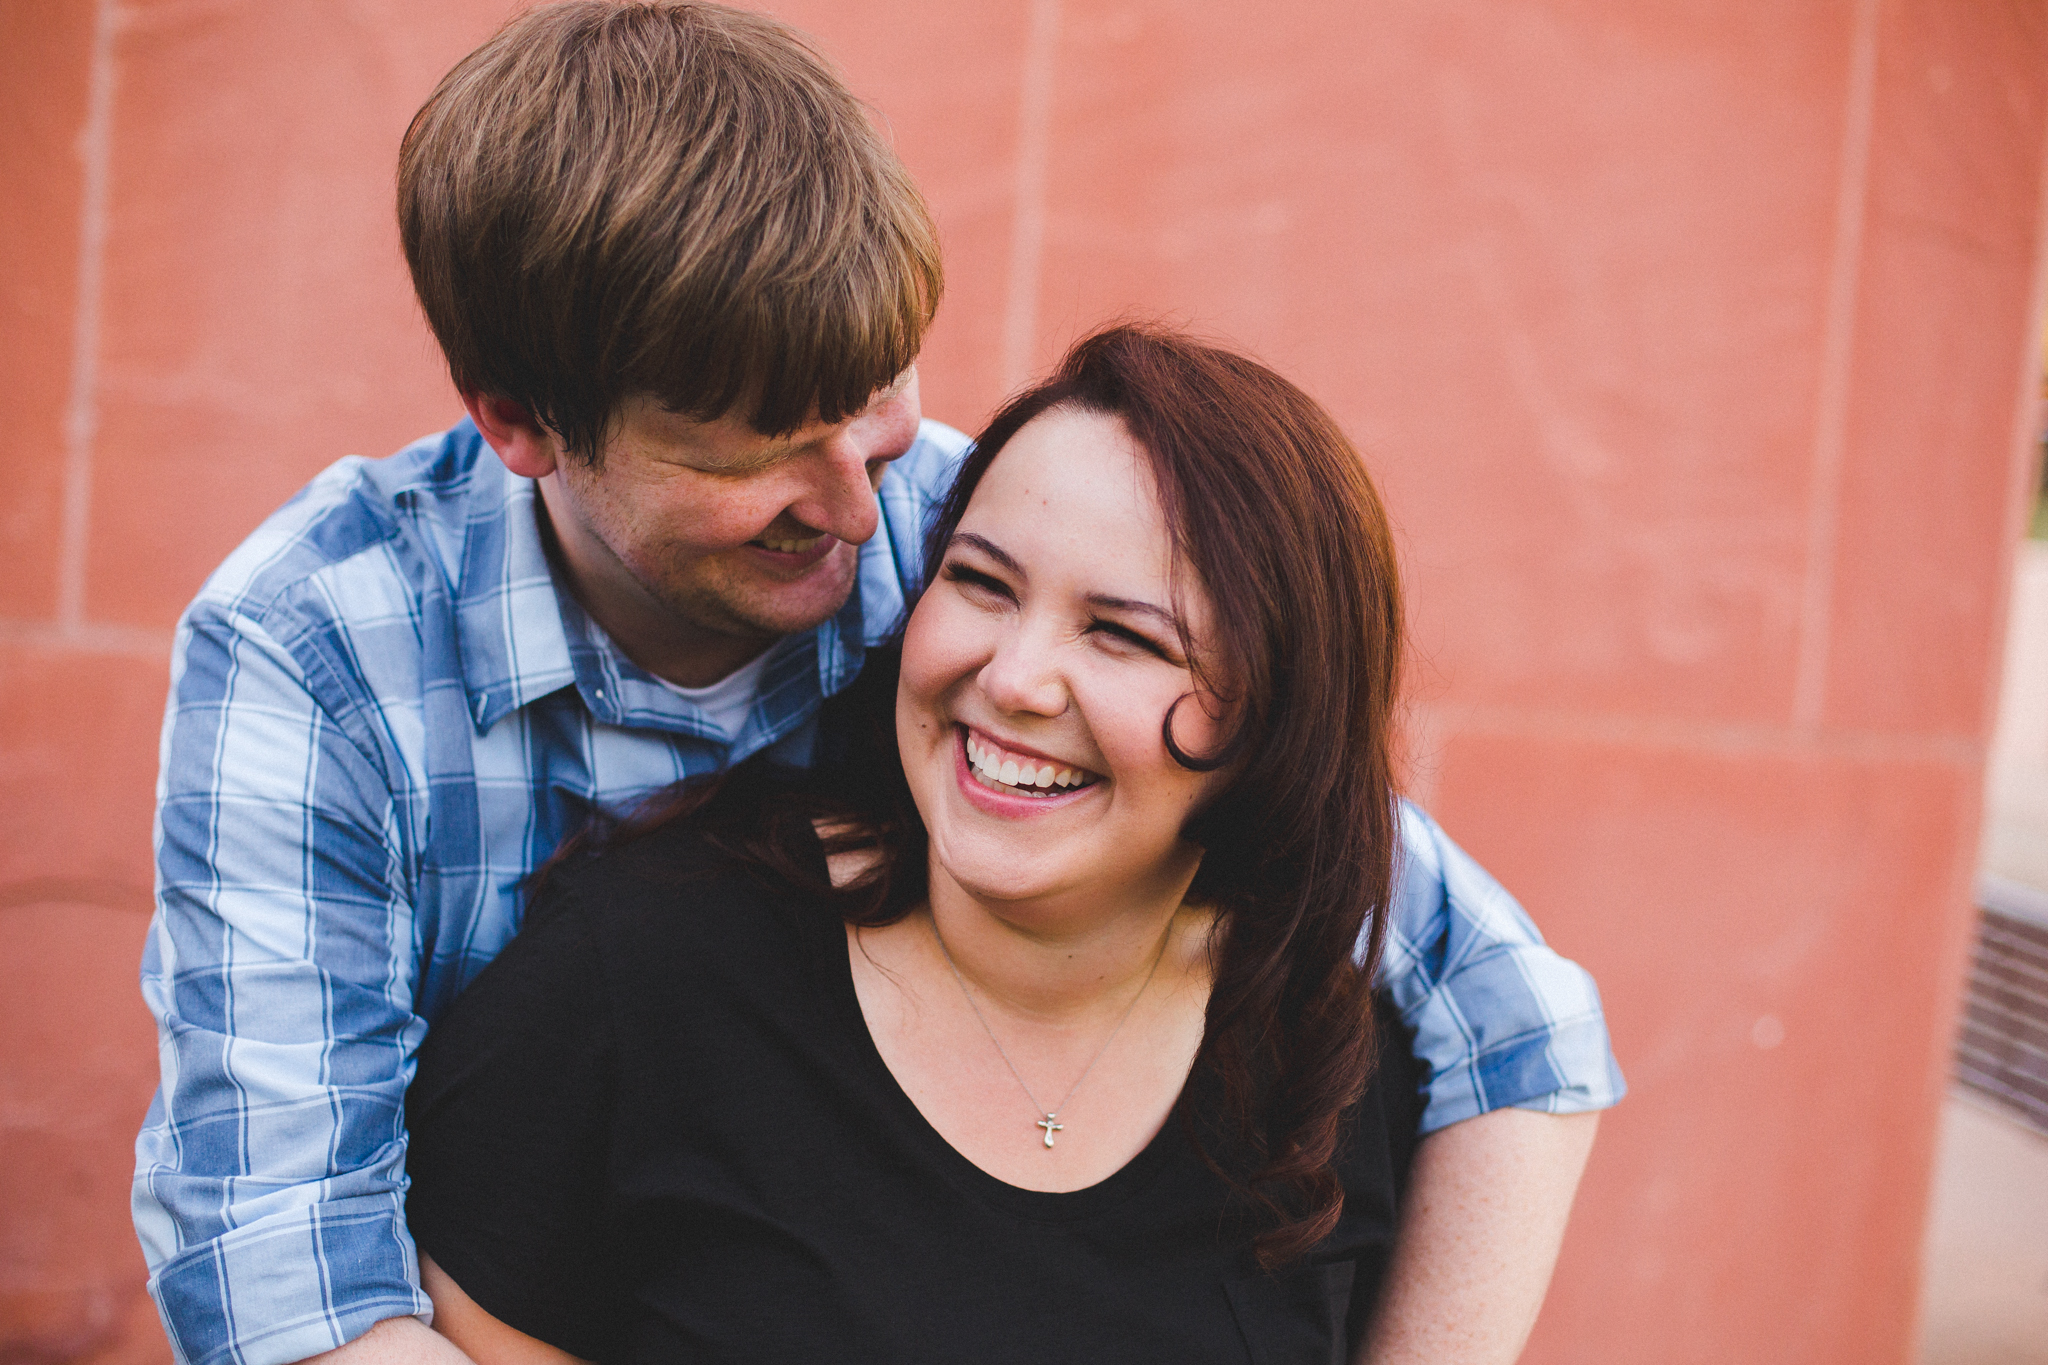 aaron-kes-photography-laughing-moment-engagement-session-photo